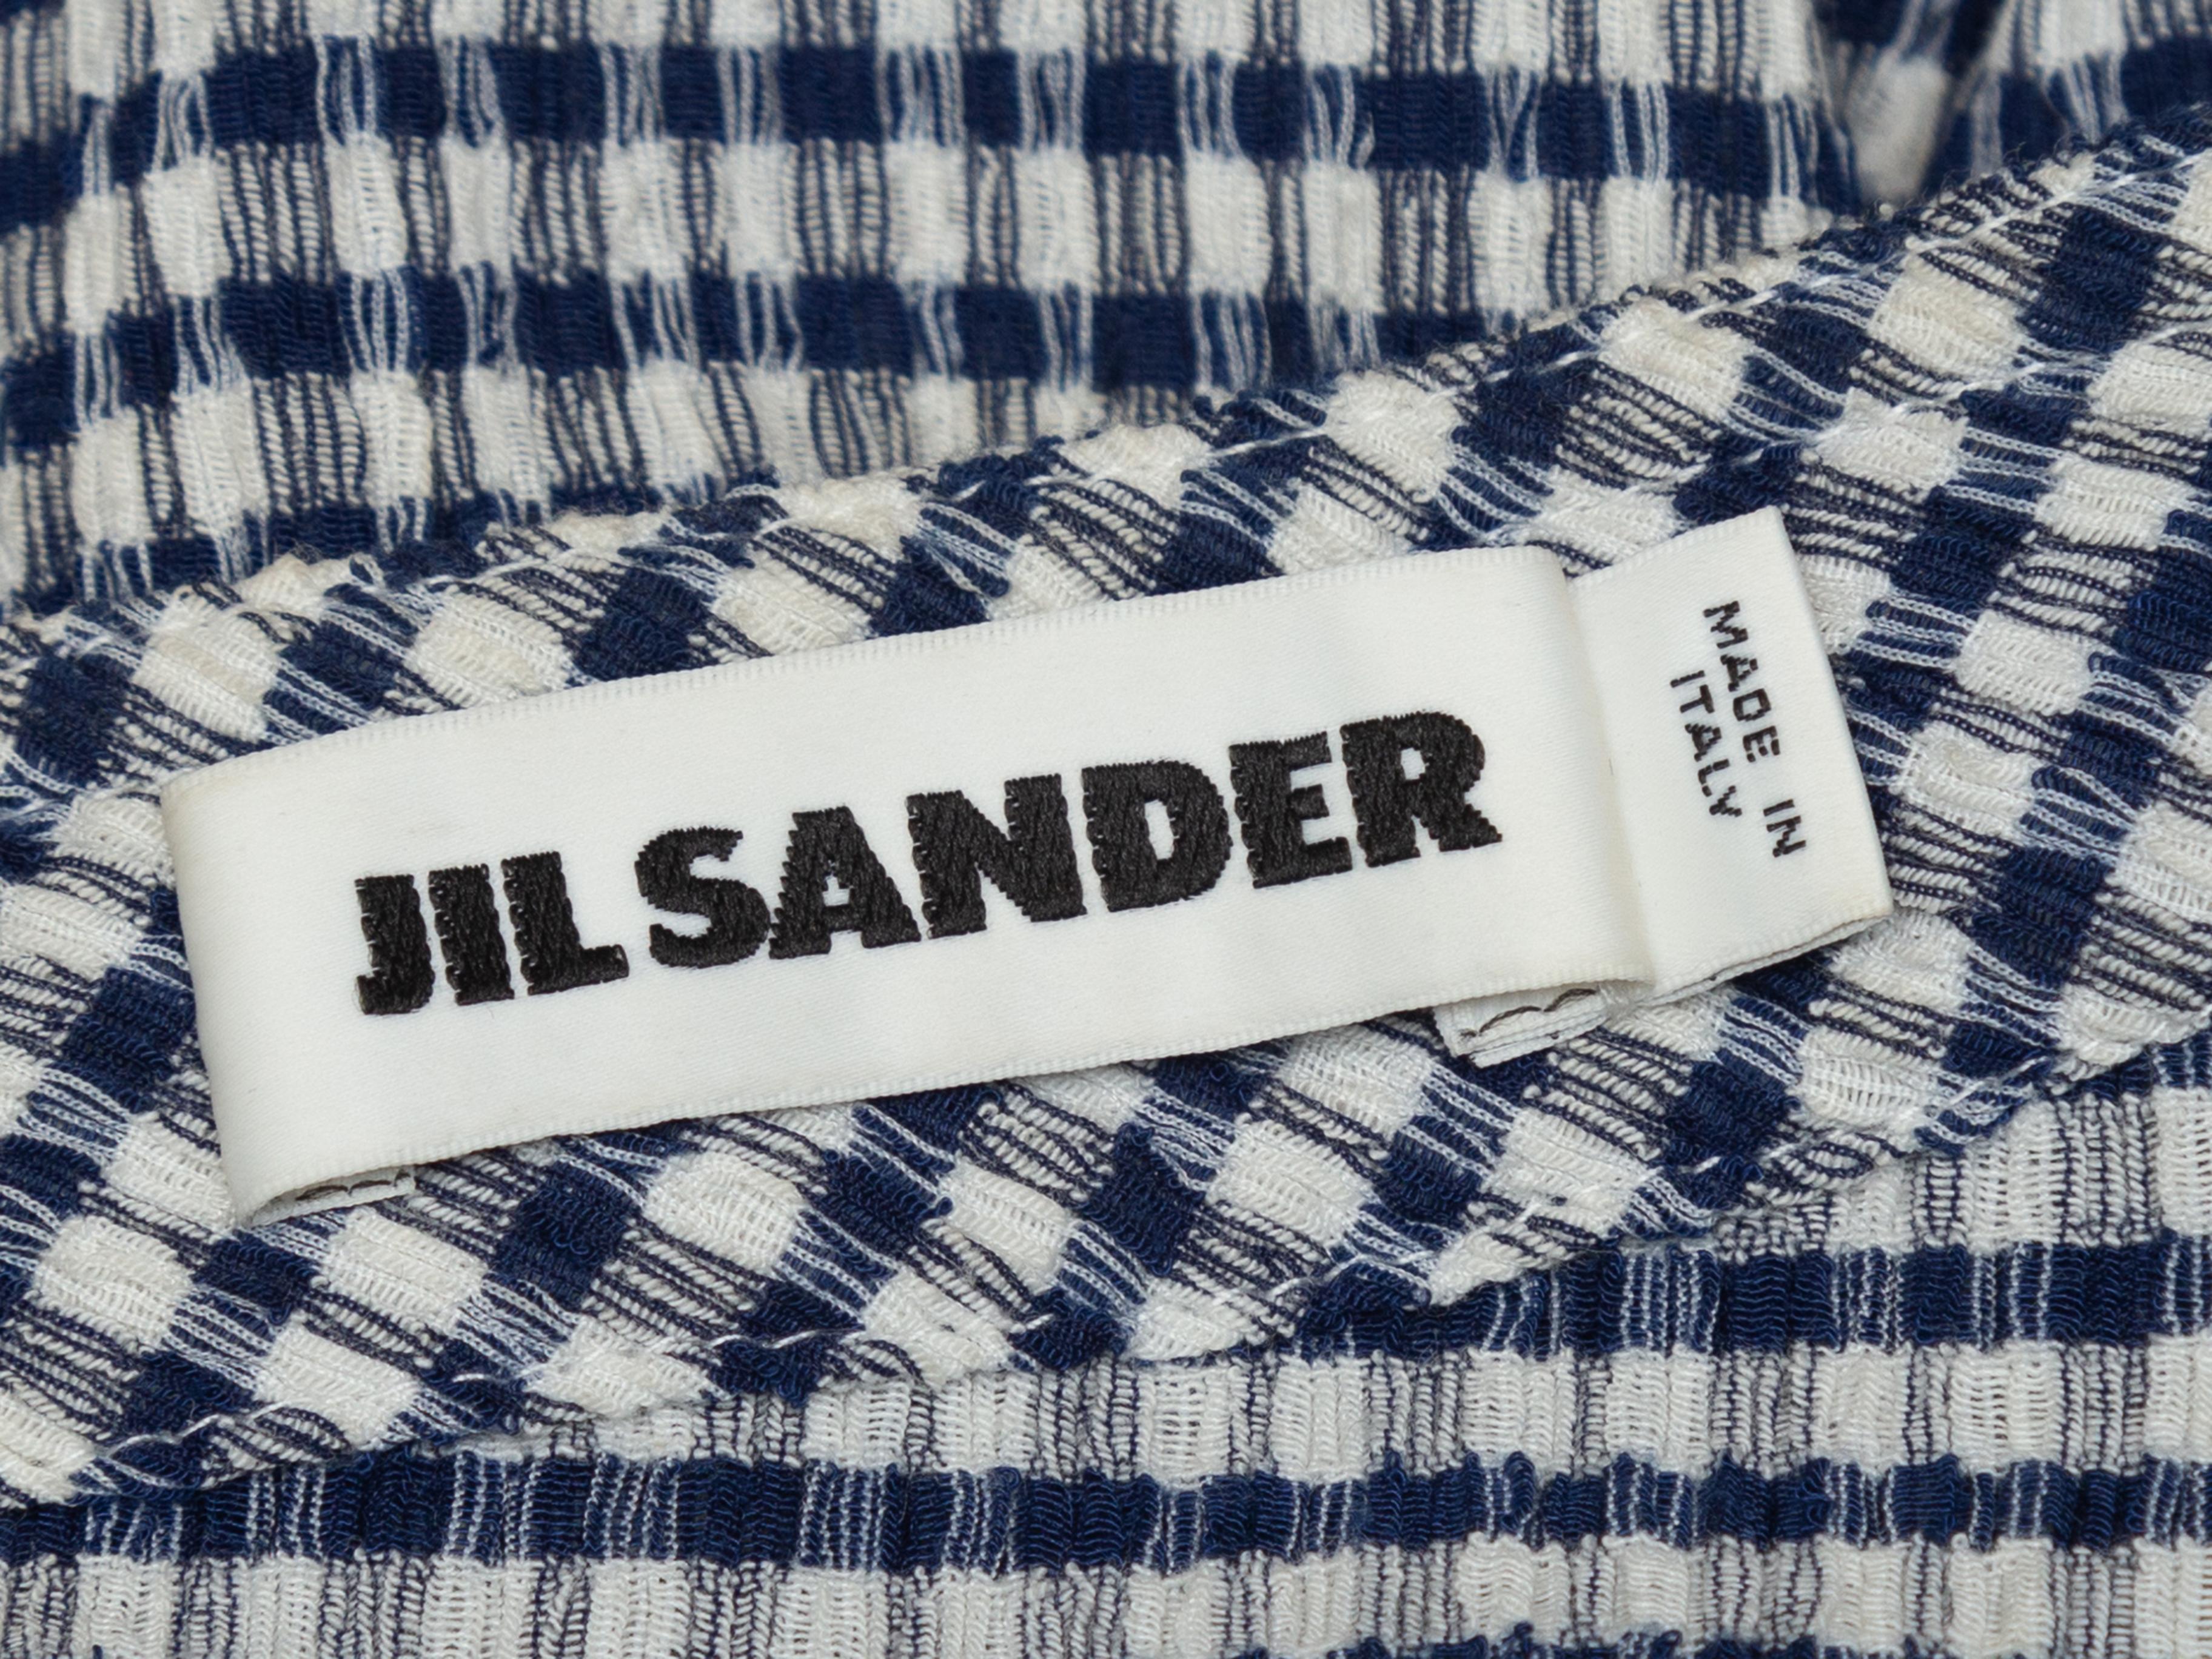 Product details: Navy and white textured gingham midi skirt by Jil Sander. Zip closure at center back. Designer size 40. 34